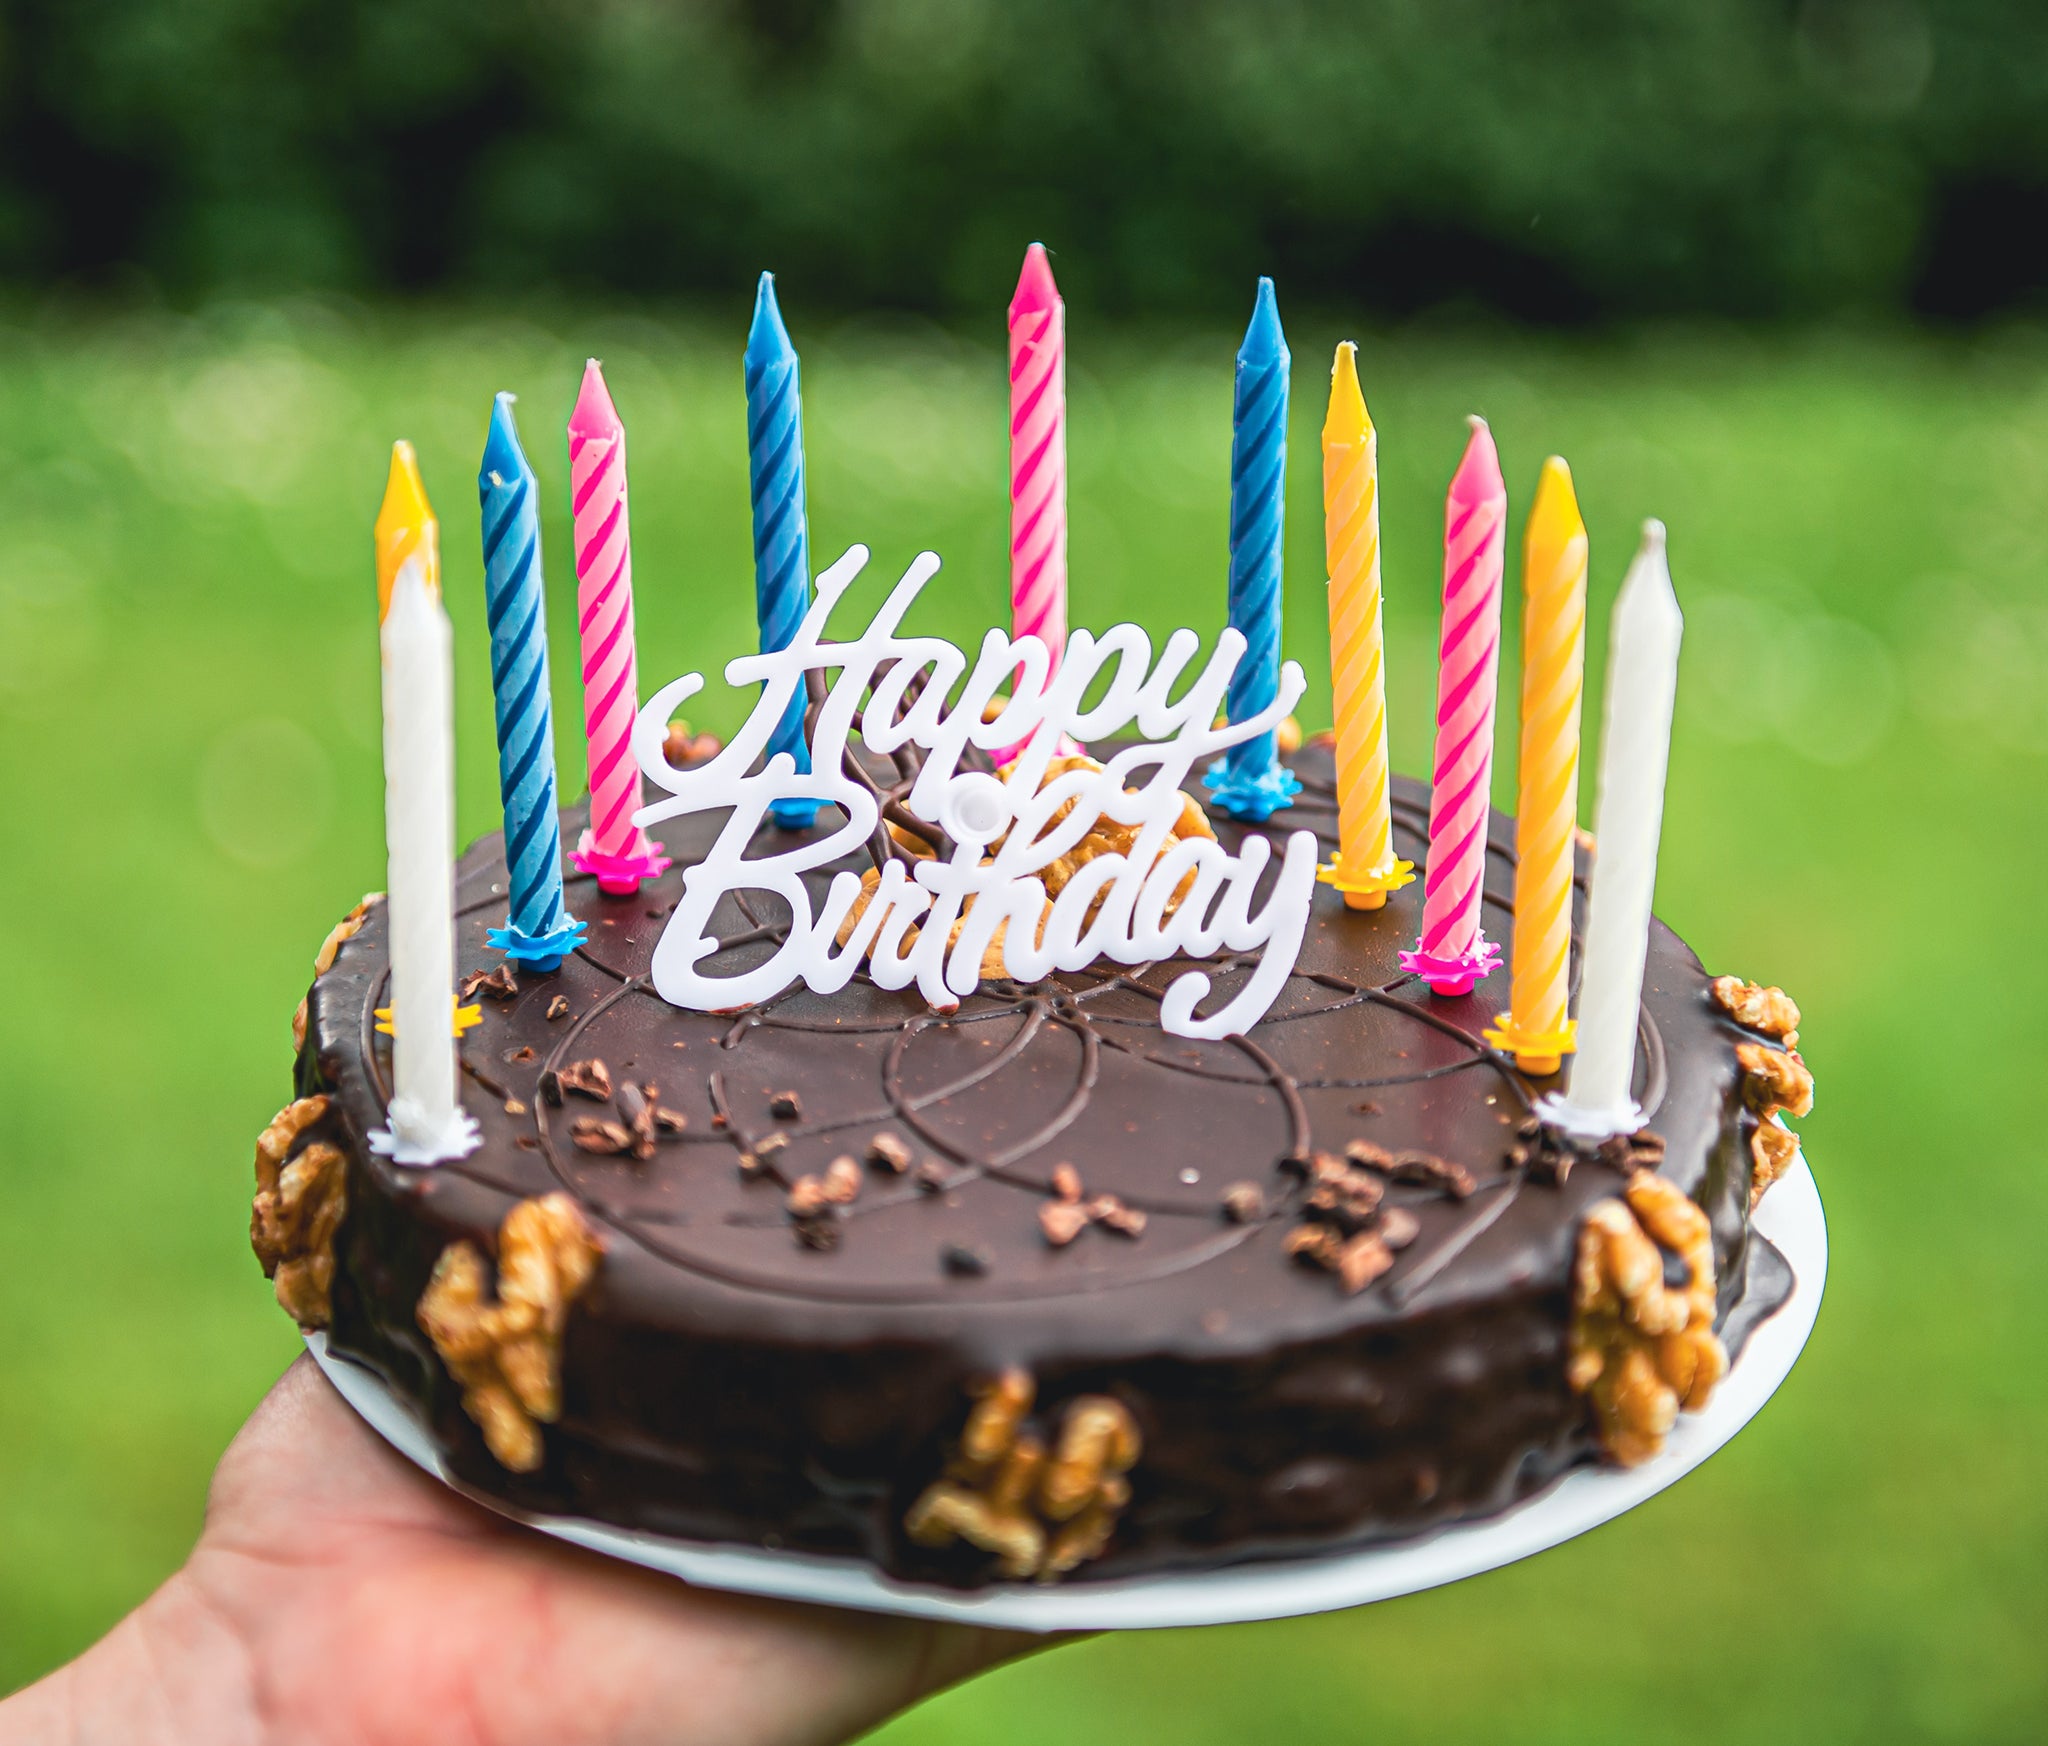 A hand holding a chocolate frosted birthday cake with candles.